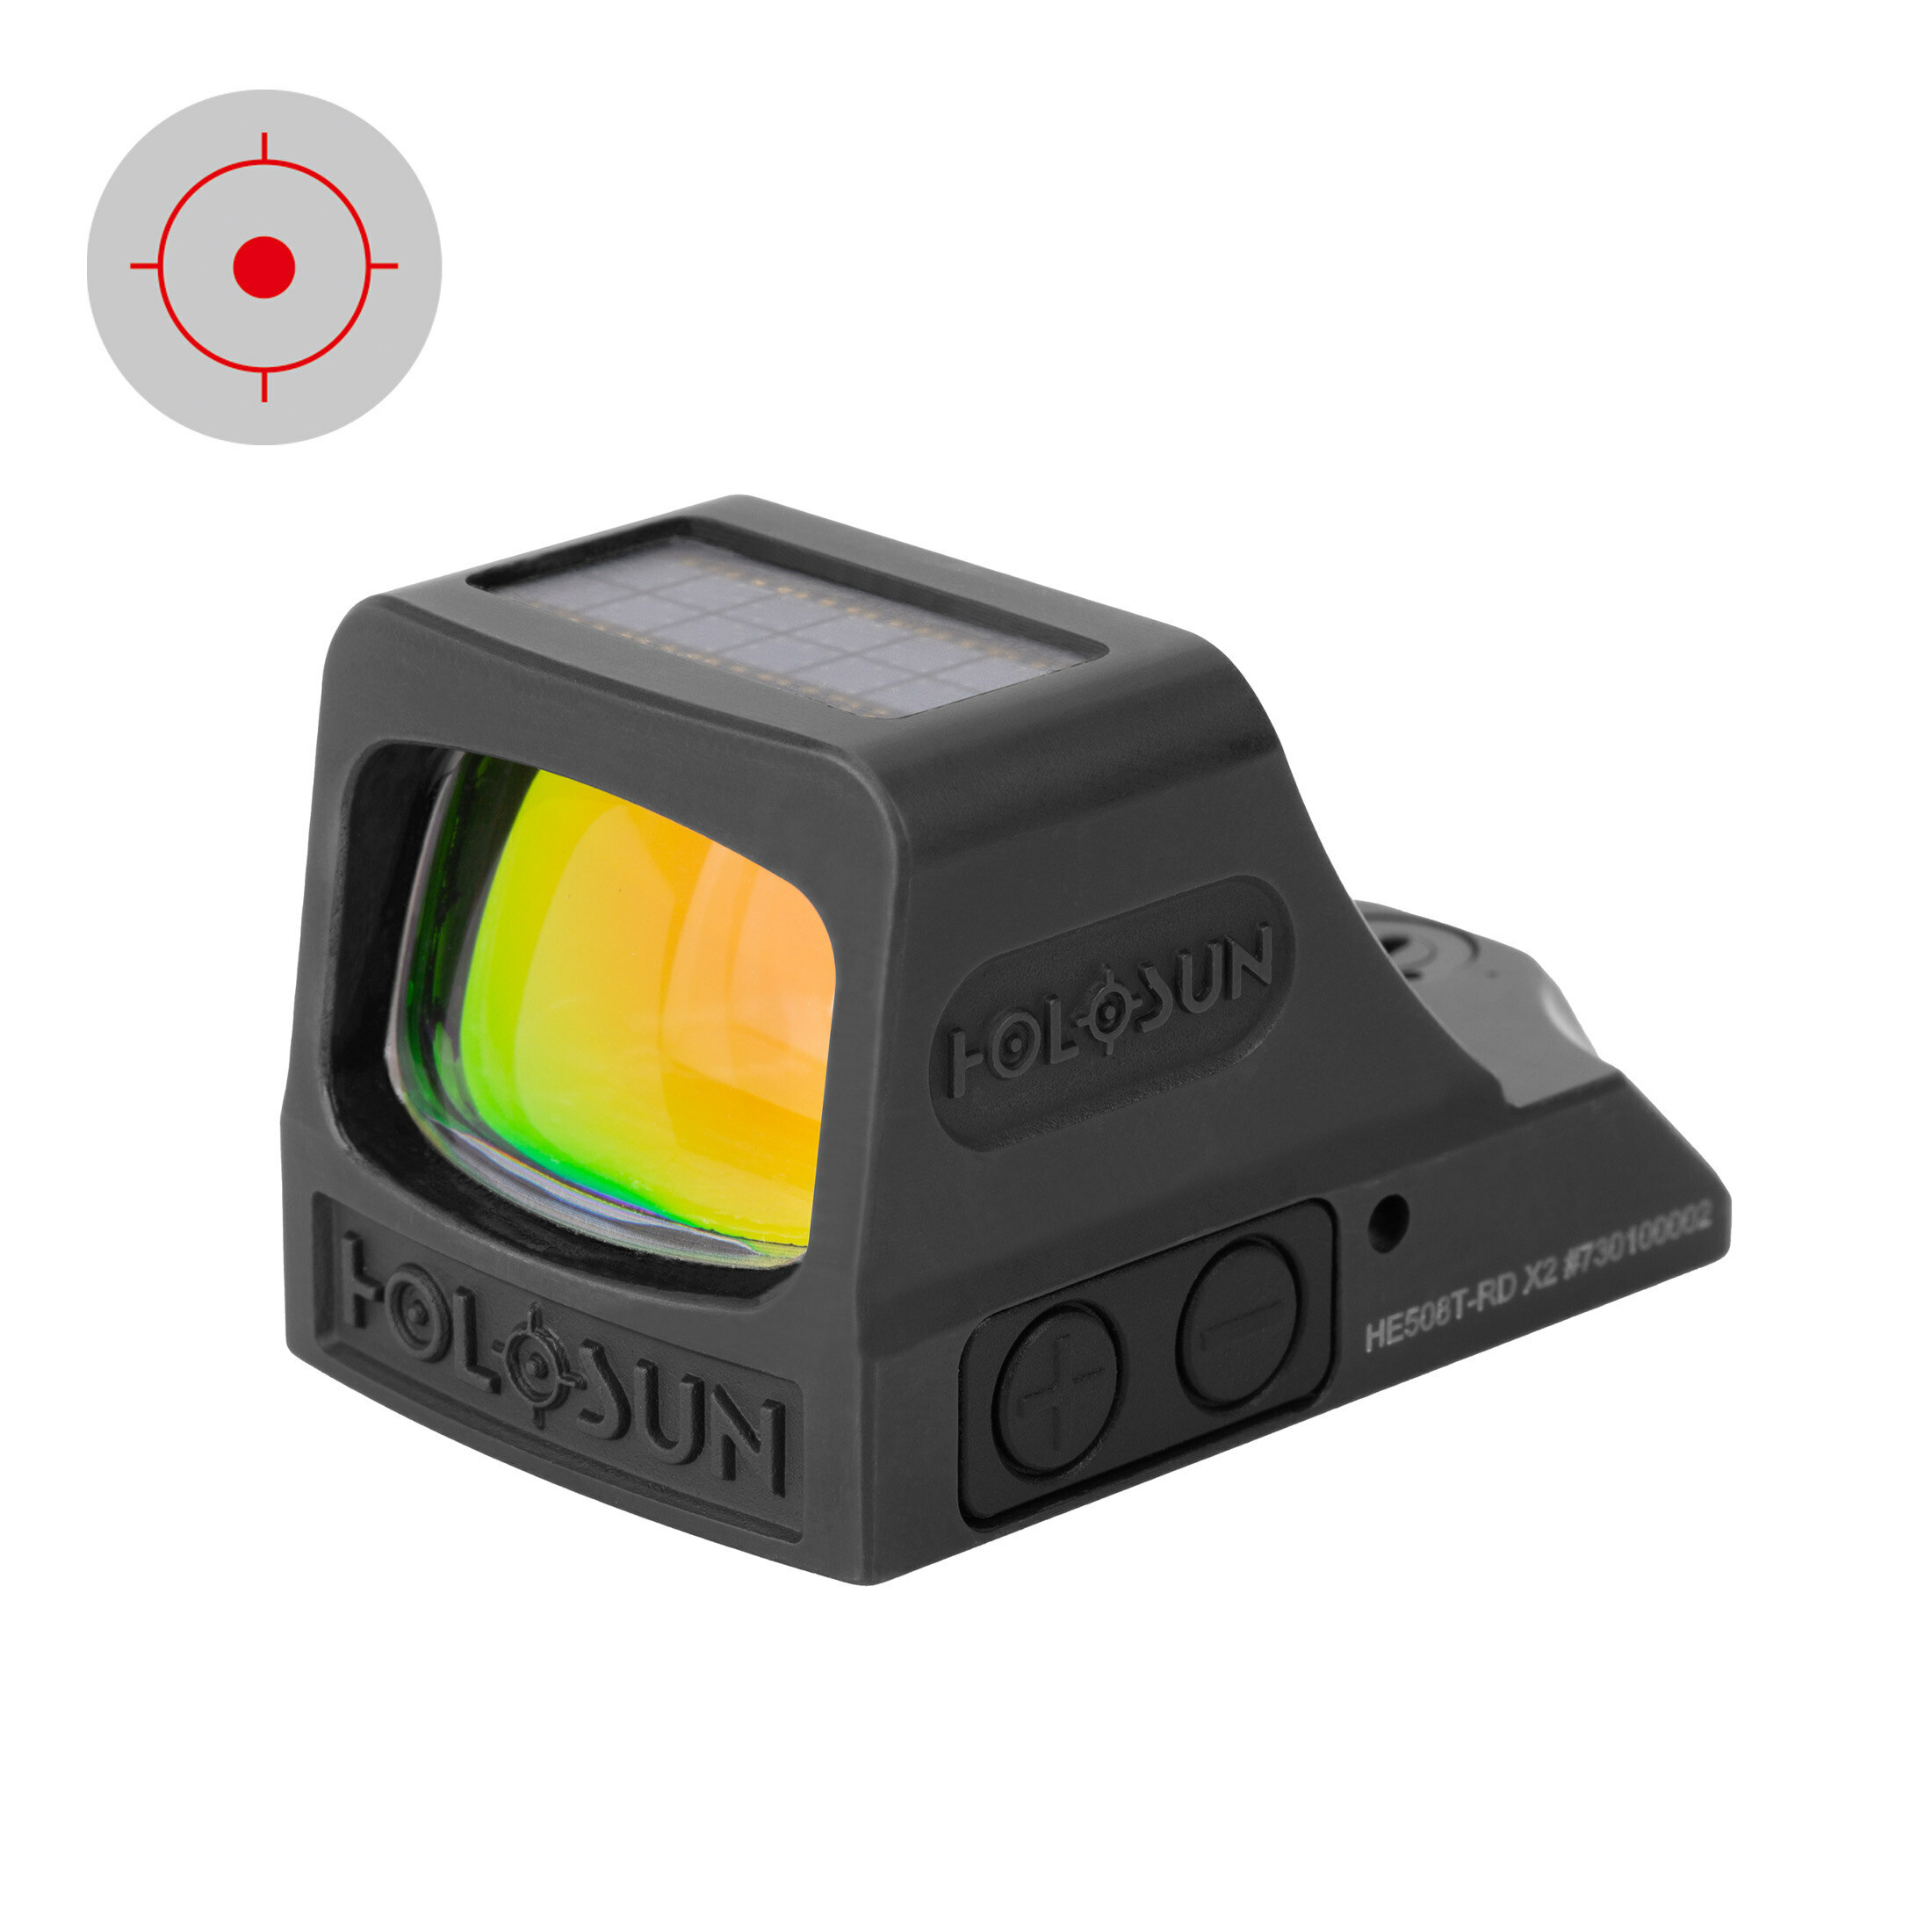 Holosun Open Reflex Red Dot Sight HE508T-RD-X2 with switchable reticle, innovative lock mode and ti…